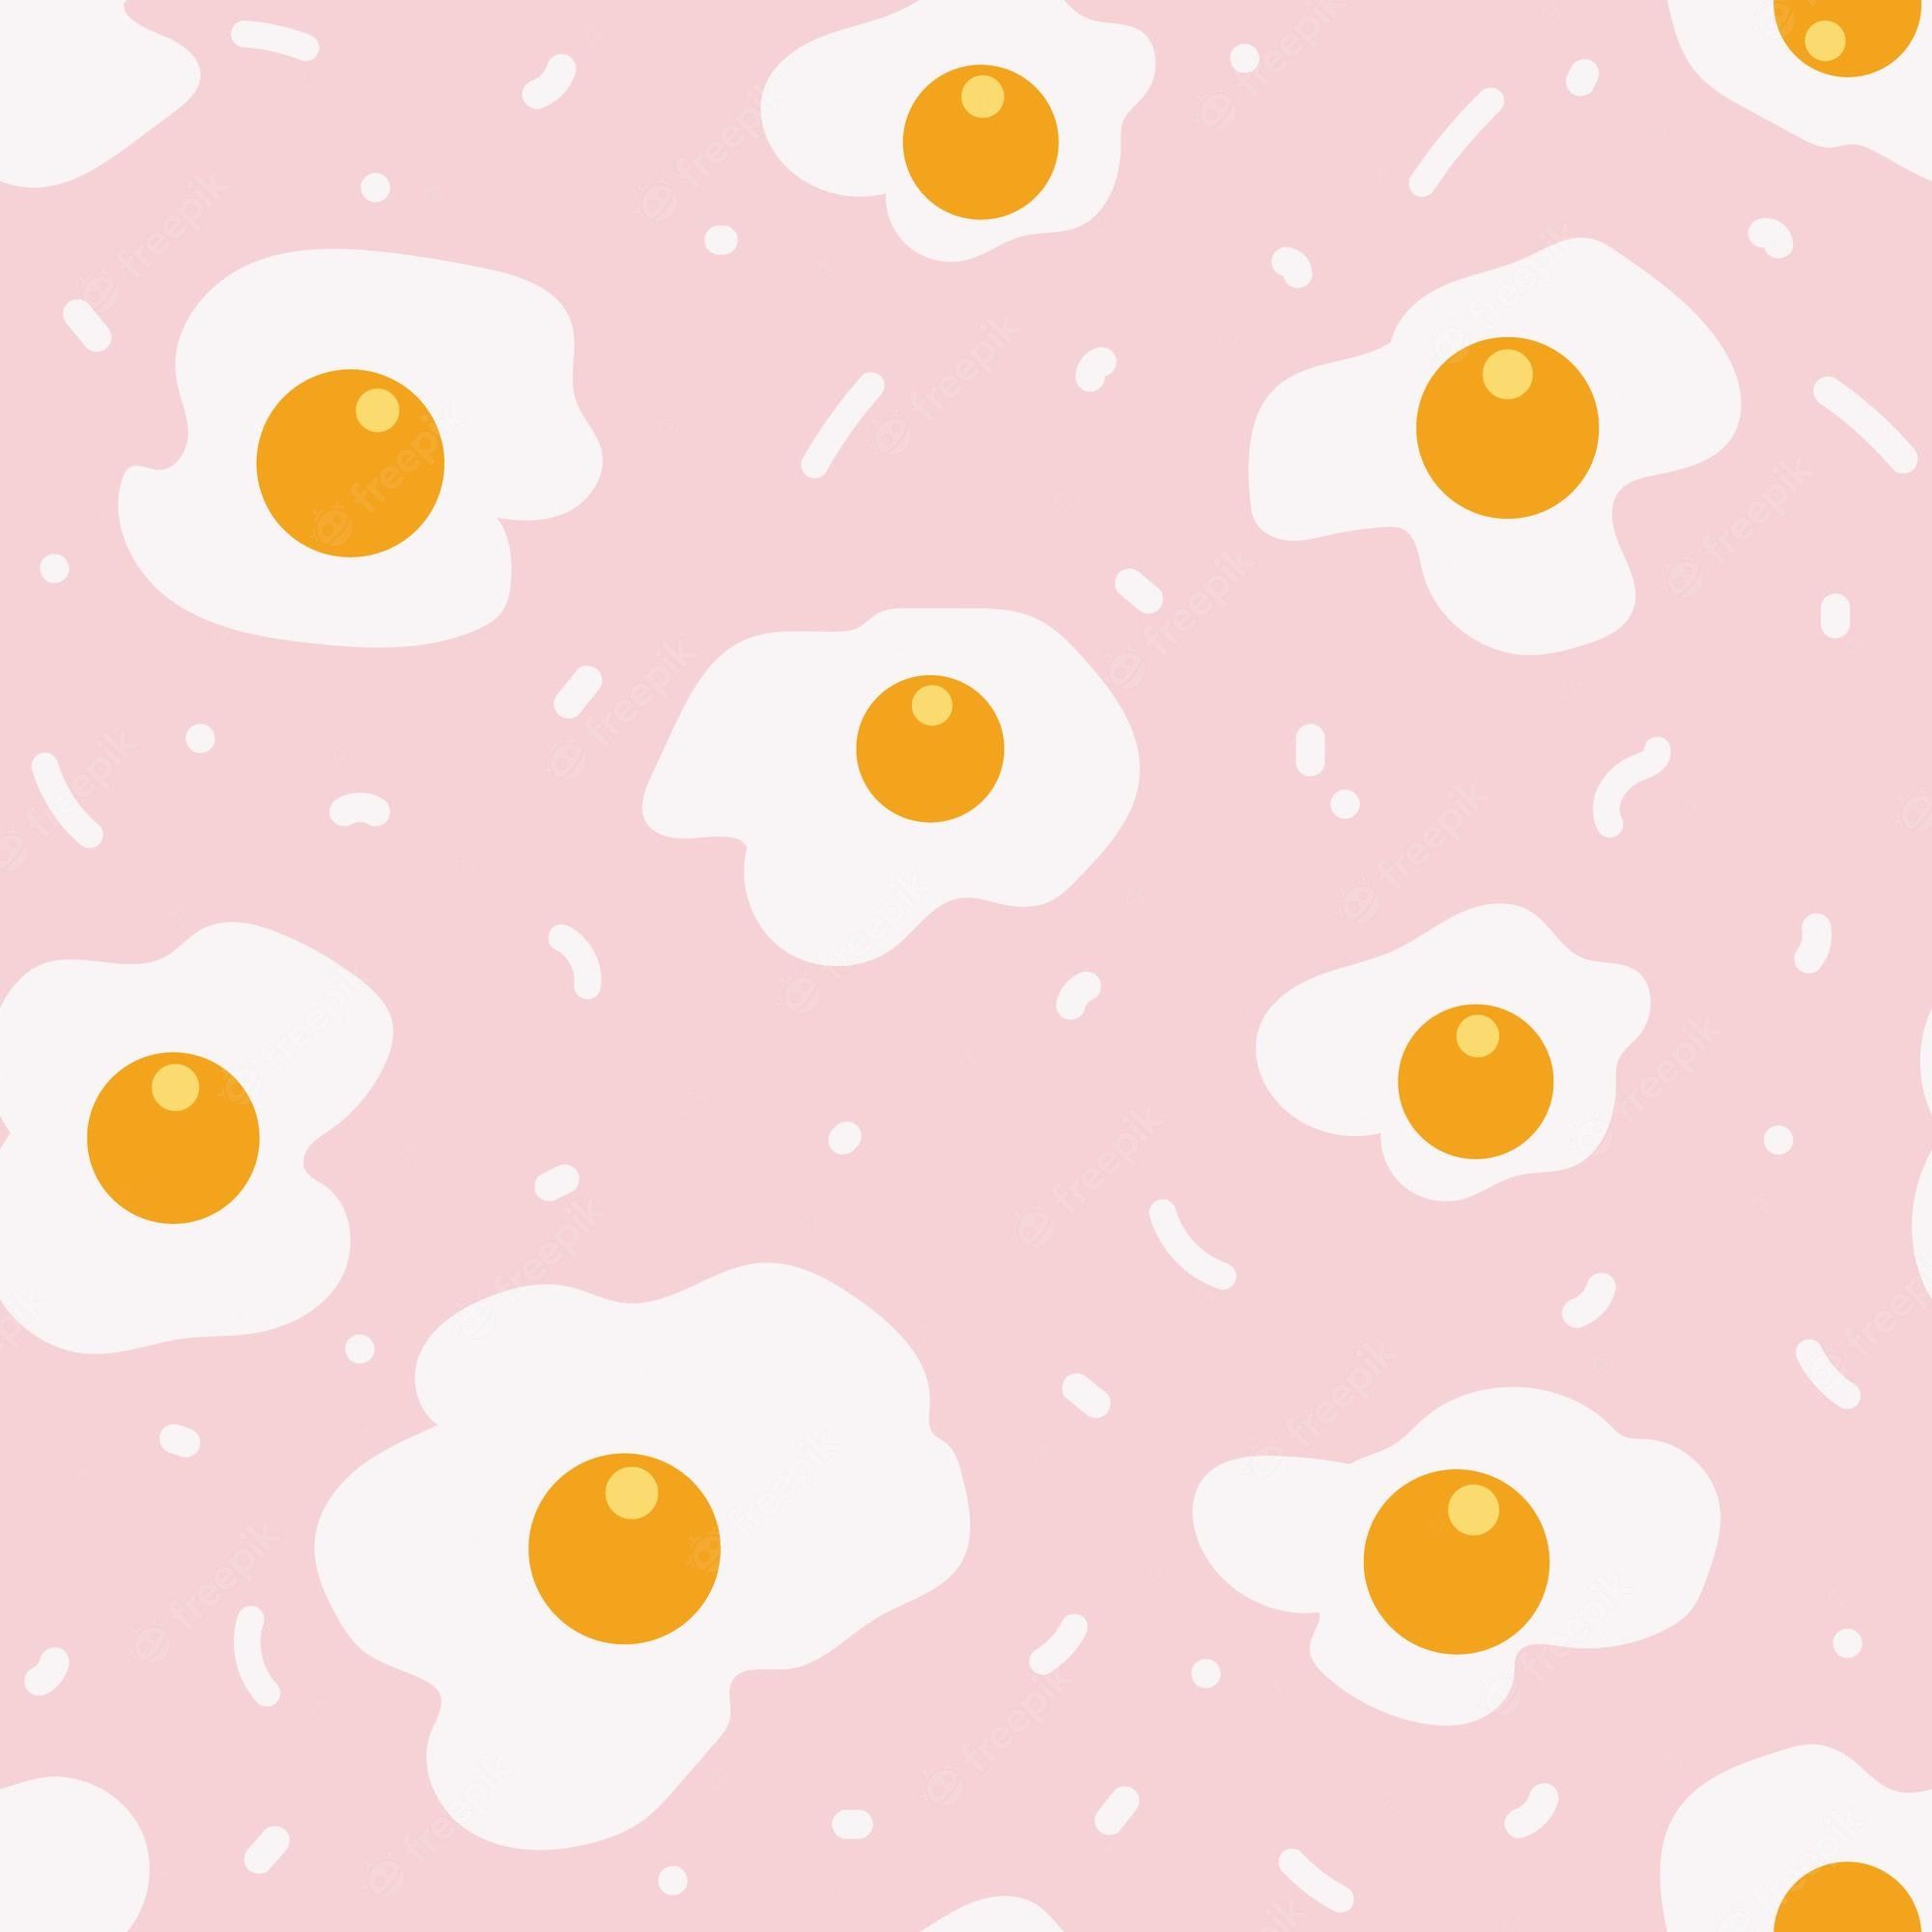 Premium Vector. Fried eggs seamless pattern on pink background vector illustration